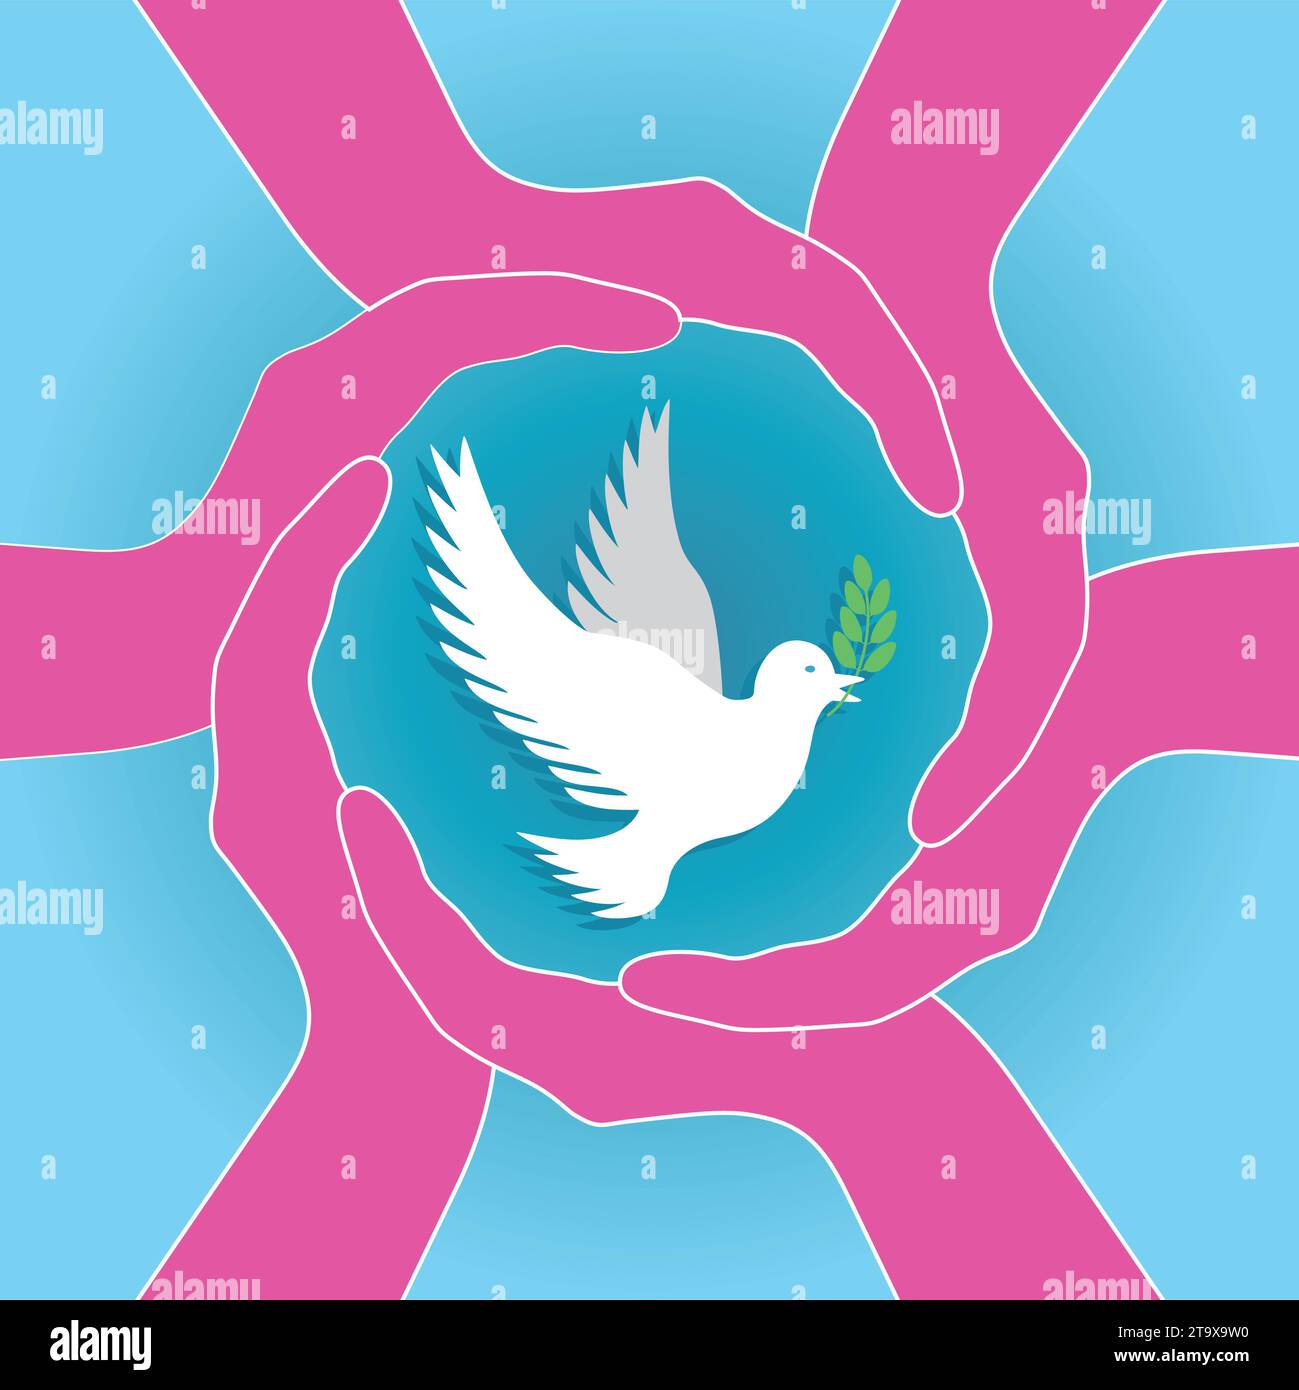 White pigeon in a frame of pink hands. Square composition. Vector illustration. Stock Vector